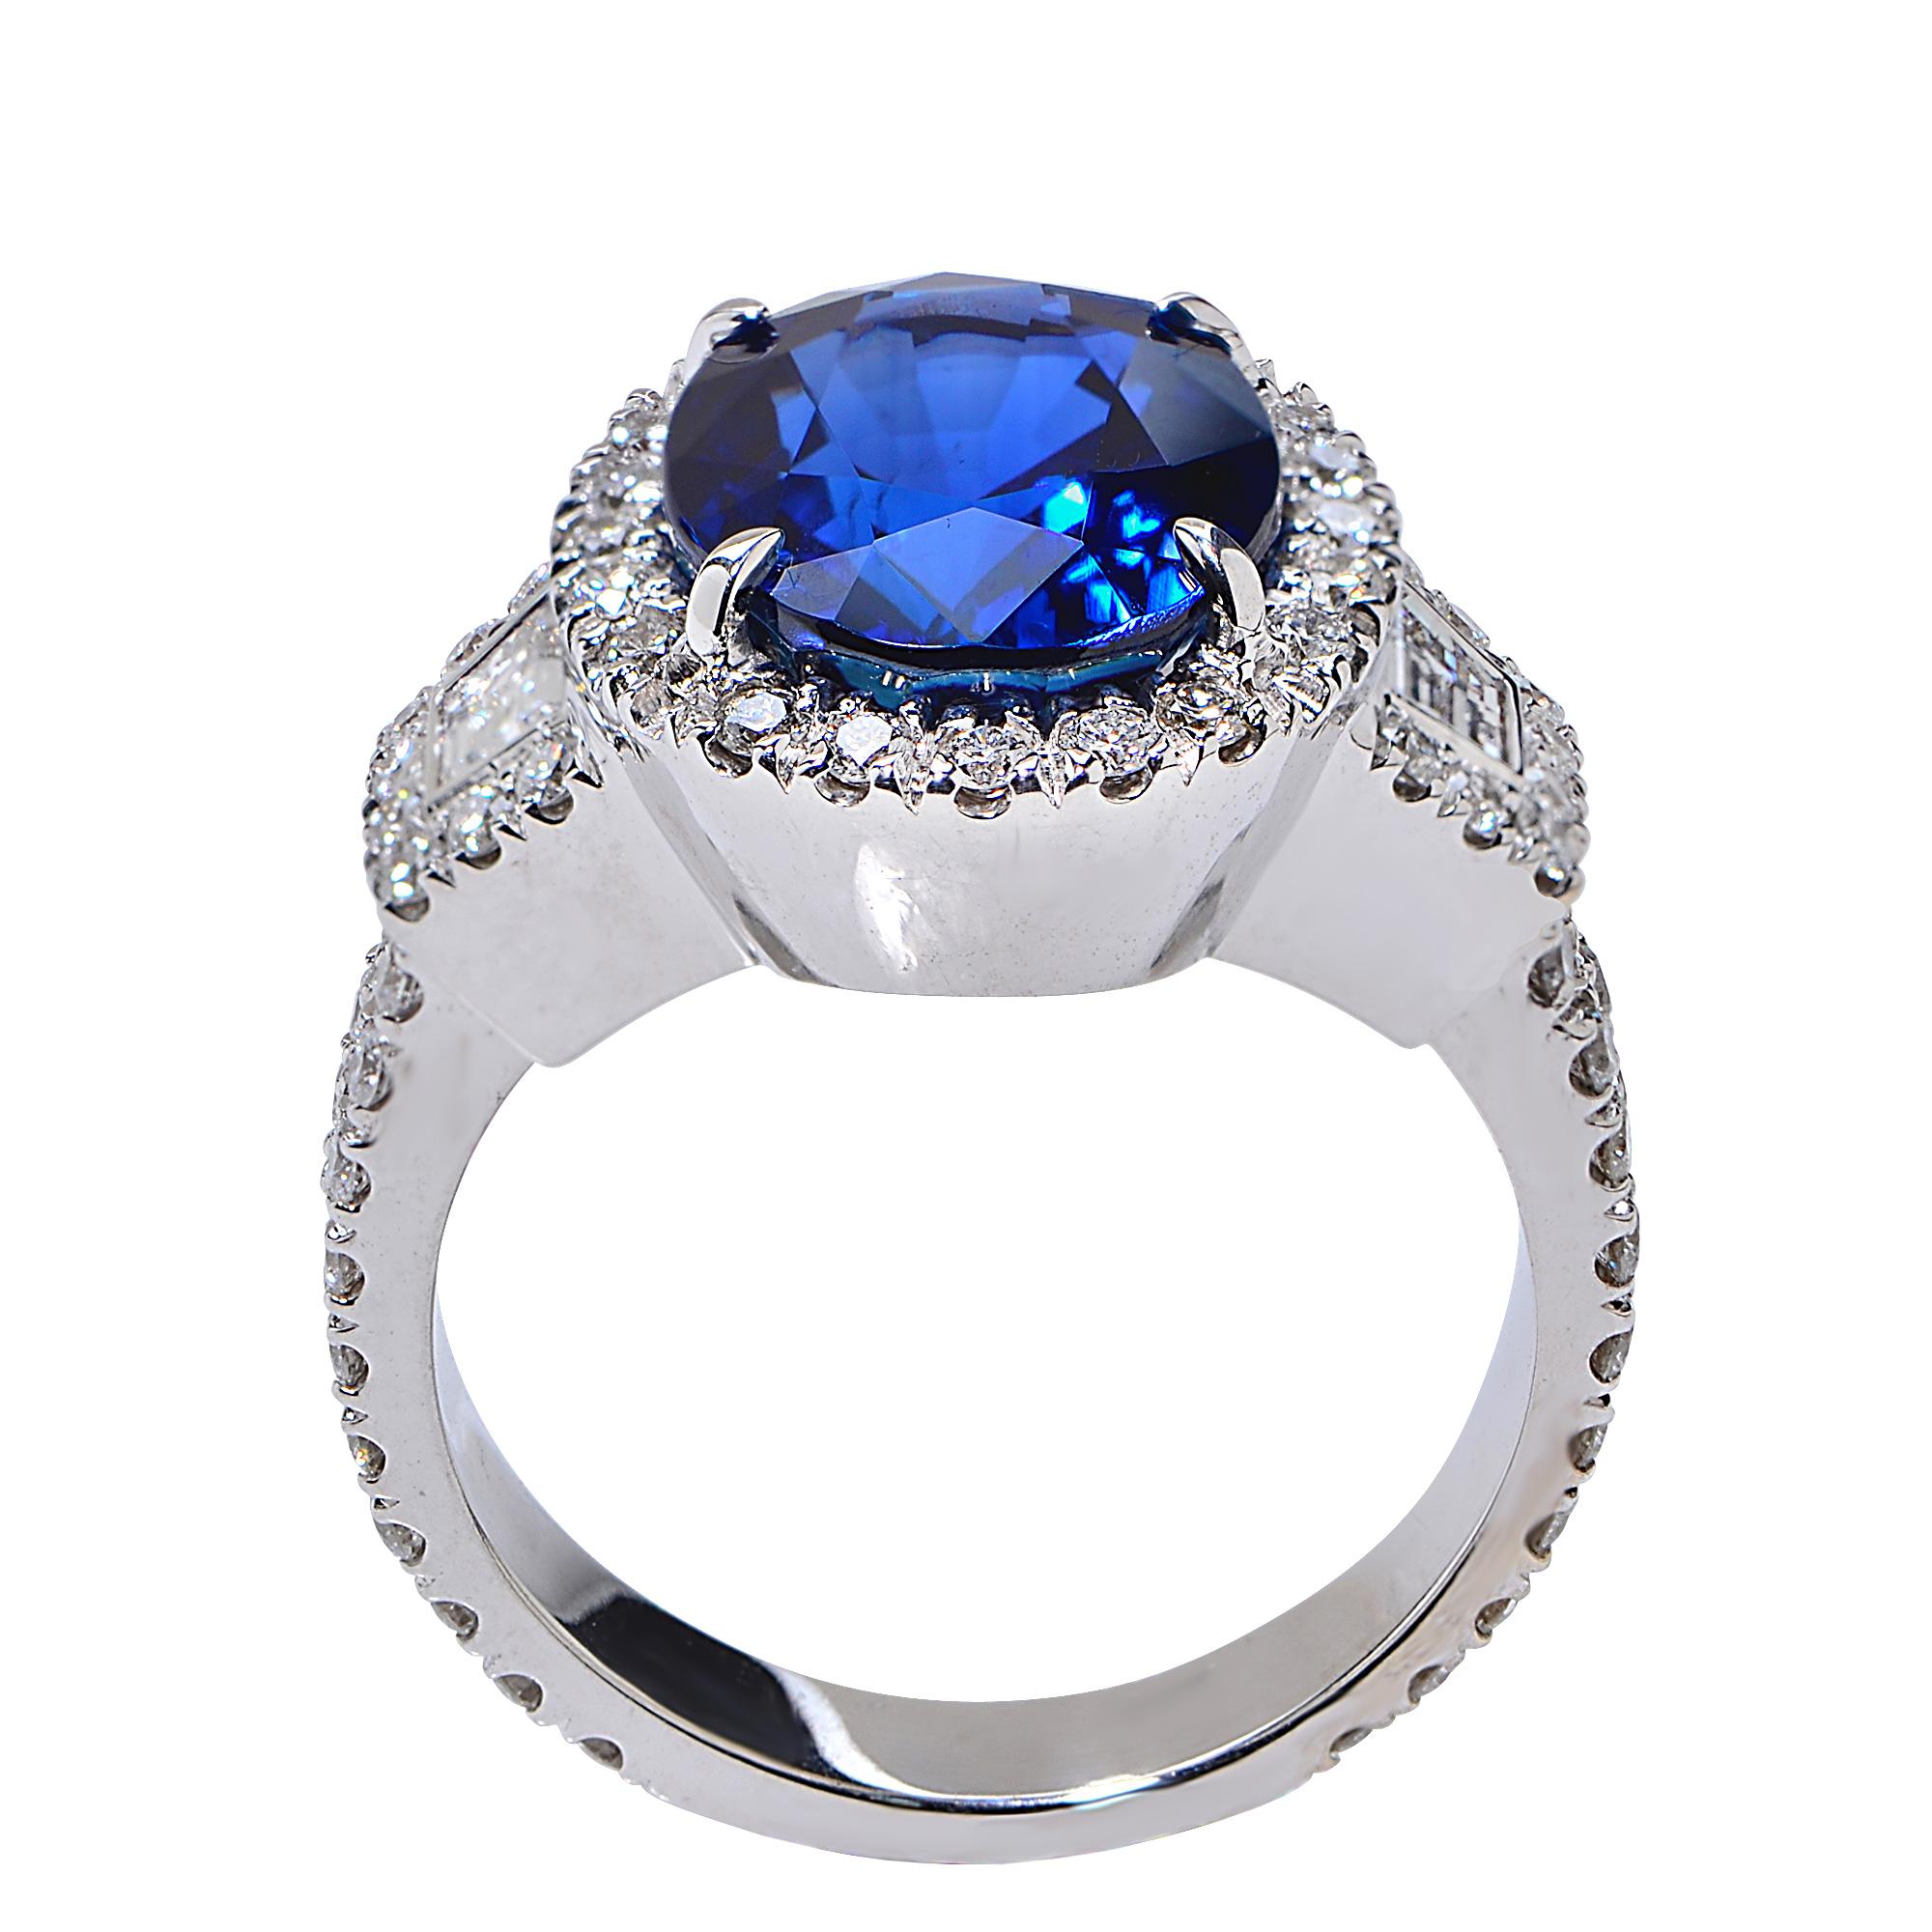 18 Karat White Gold Ring Featuring a 6.22 Carat Natural Blue Sapphire from Madagascar, Heated, AGL Certified, Accented by 1.16 Carats of Trapezoid and Round Brilliant Cut Diamonds, G Color, VS Clarity.

Ring Size: 6
Weight: 11.69 grams

This